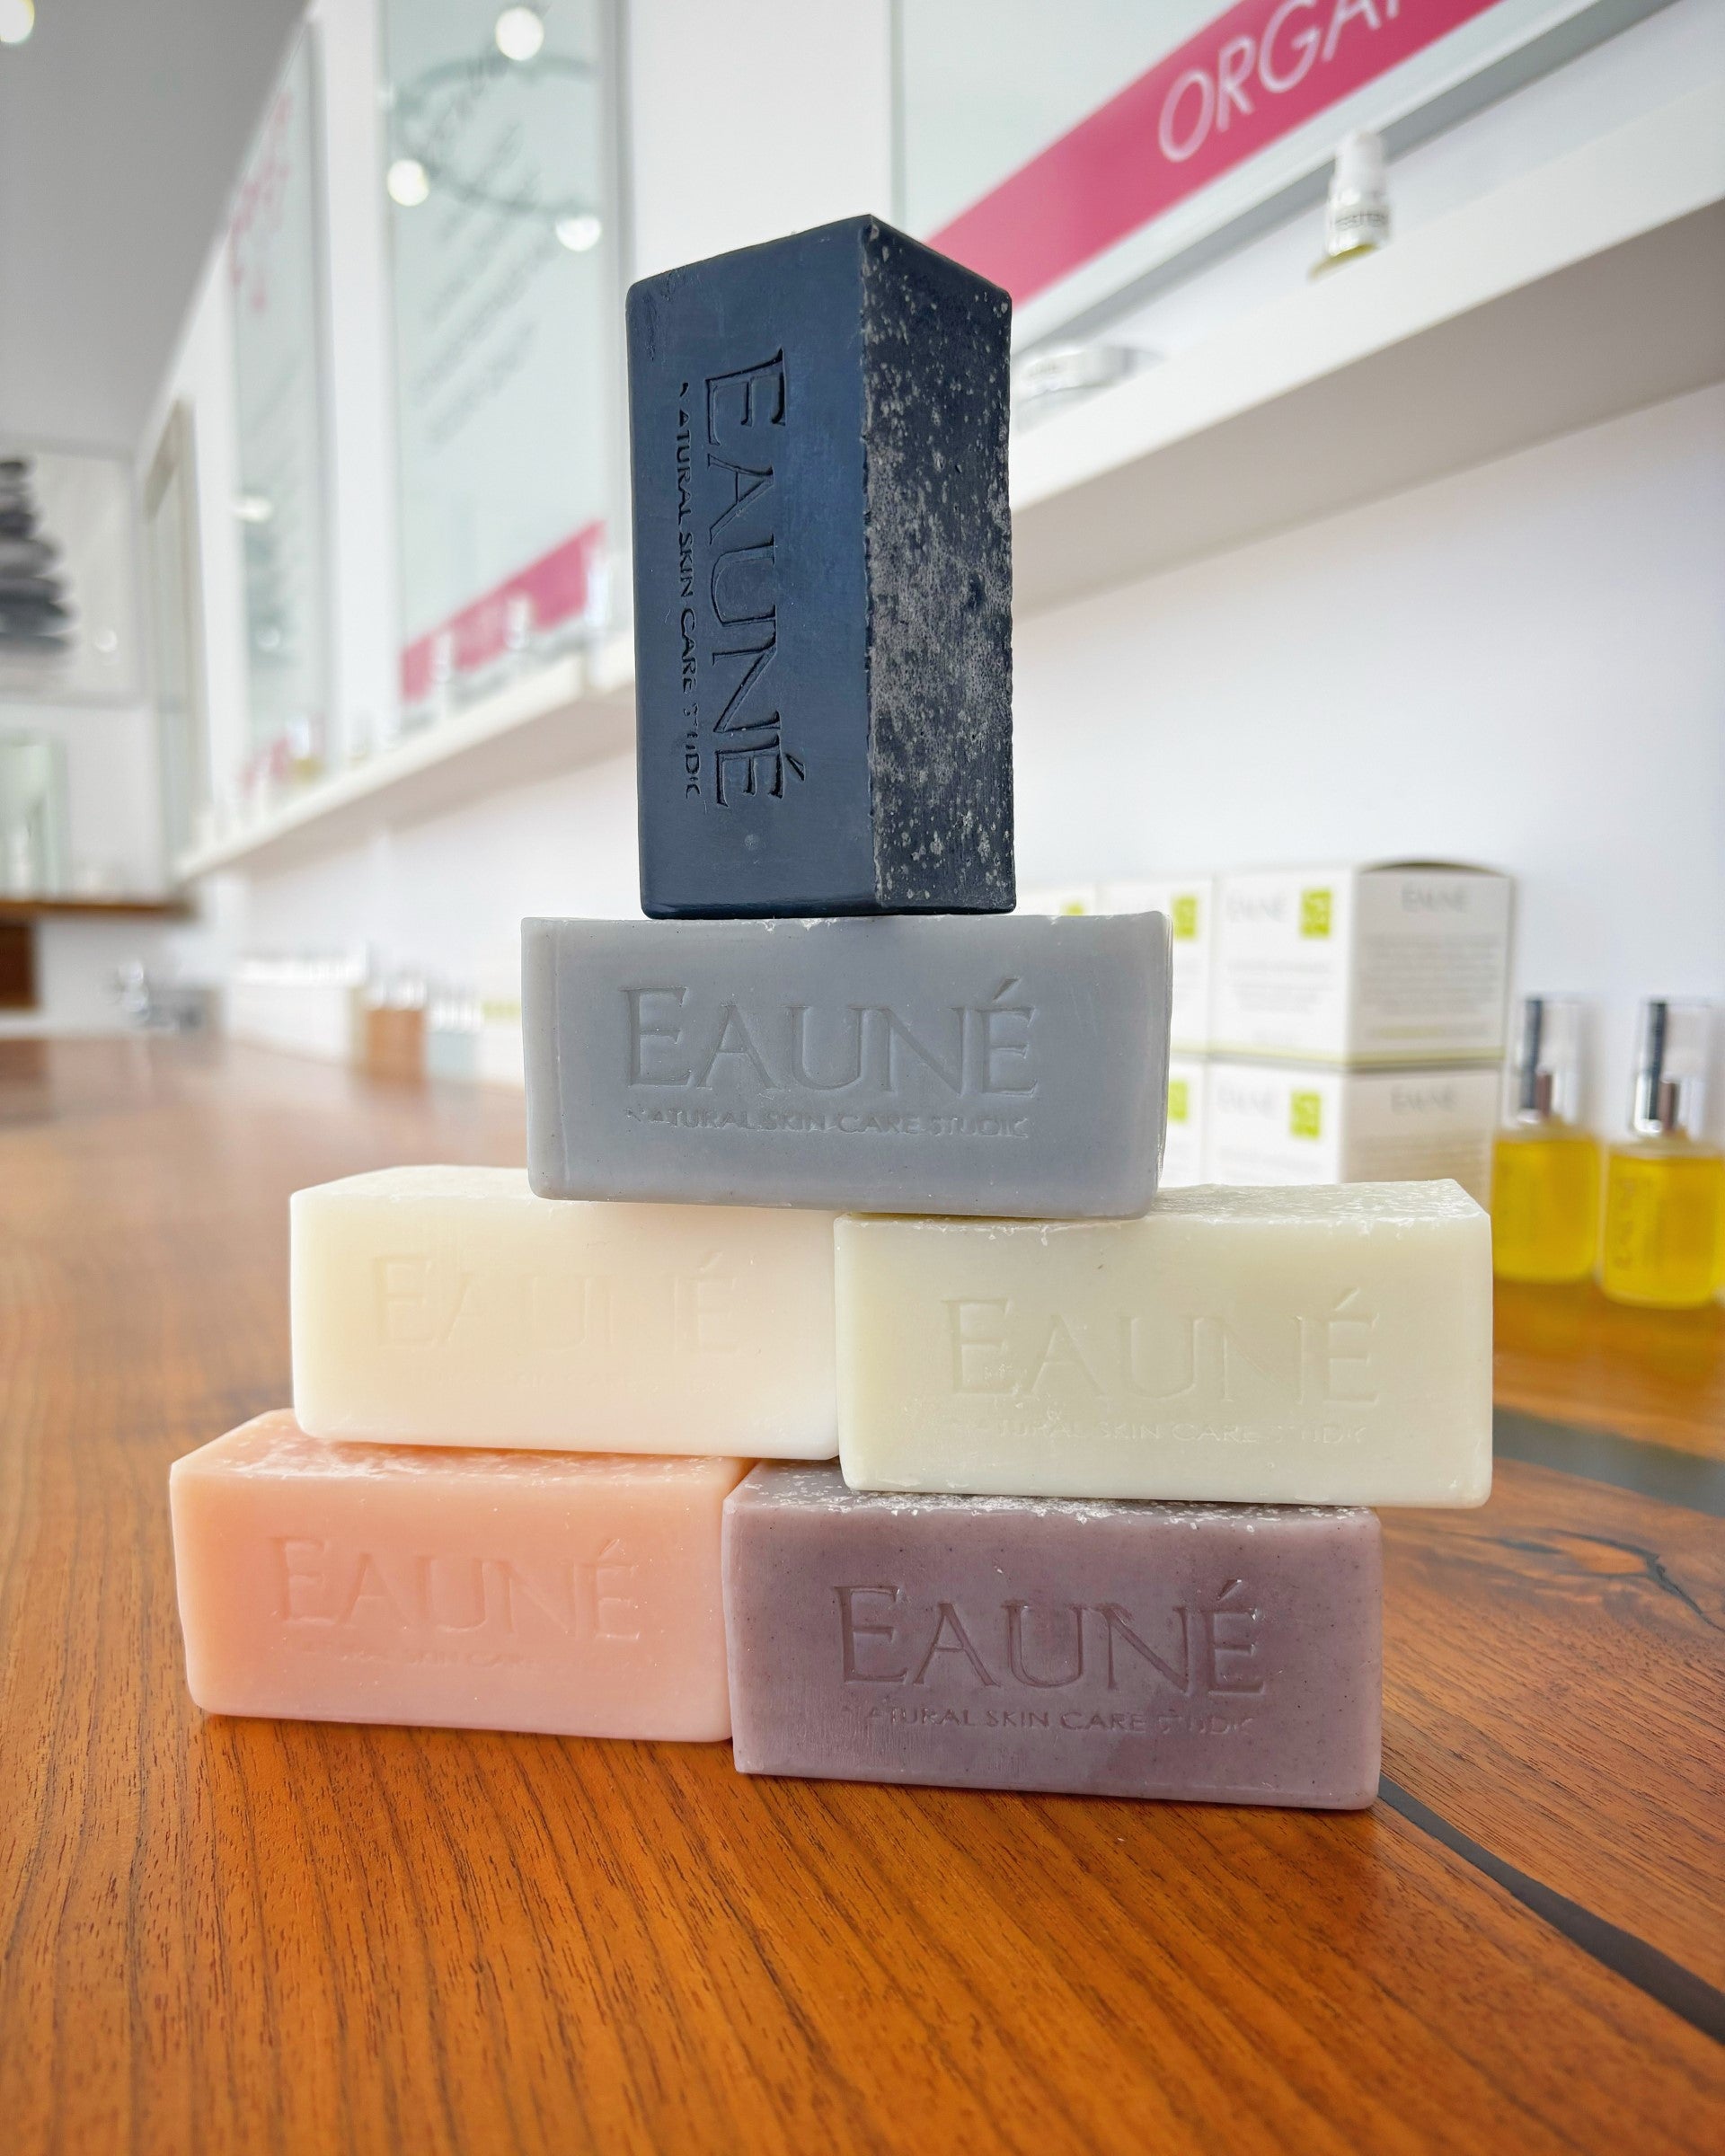 Eaune Organic Soap New Sizes Available Soon